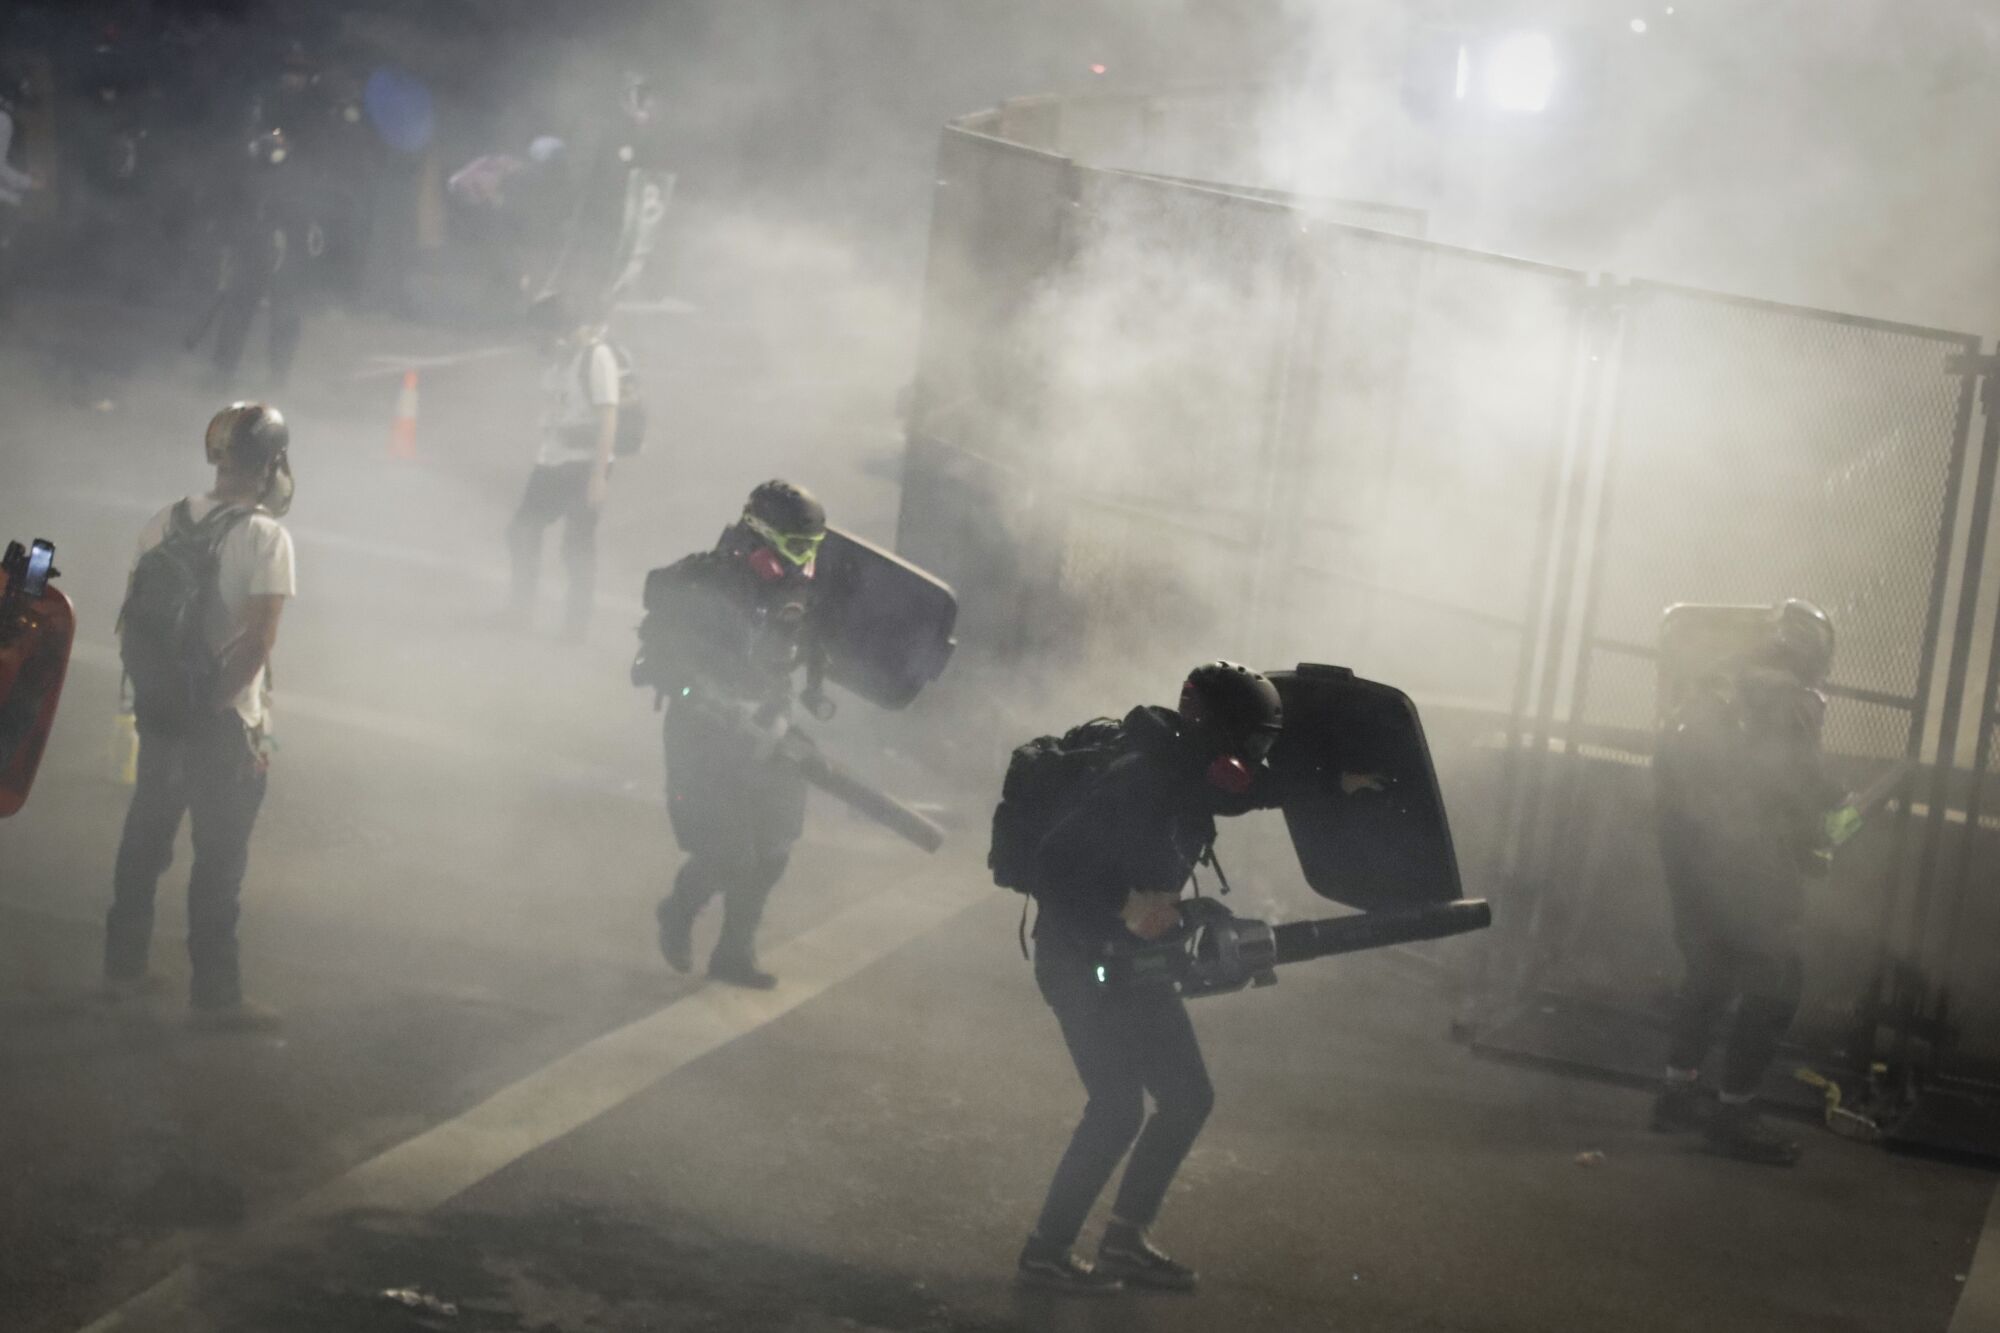 Demonstrators use leaf blowers to blow back tear gas launched by federal officers during a protest in Portland, Ore.